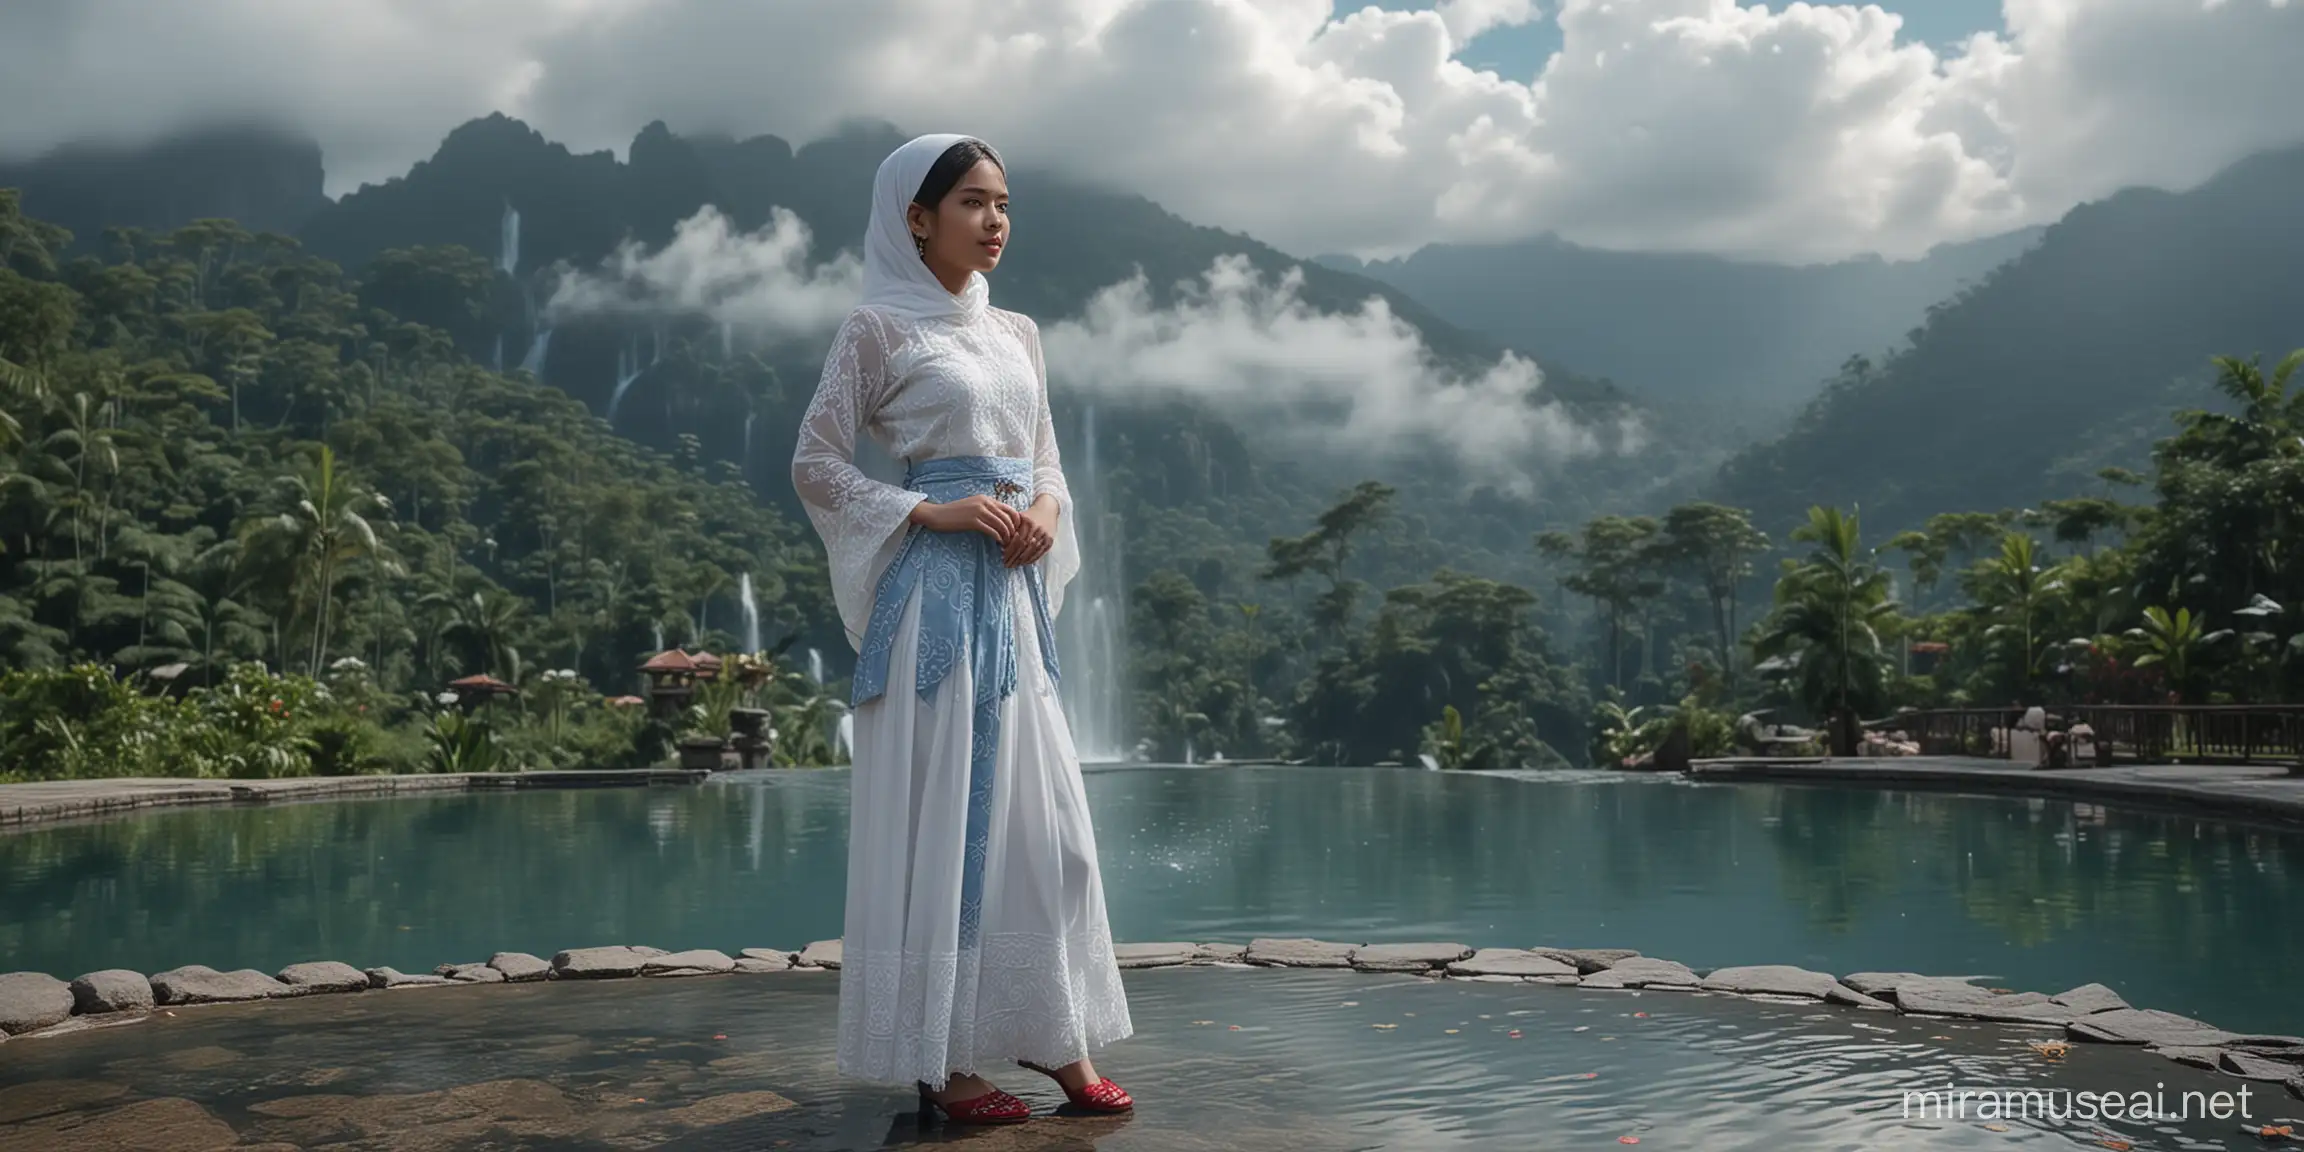   features a 17-year-old Indonesian girl in a white and blue kebaya with a hijab, standing gracefully in front of a natural mountain fountain surrounded by thin white clouds.  Beneath her dress, crimson slippers add a touch of elegance to the scene. I hope this visual creation brings your imagination to life